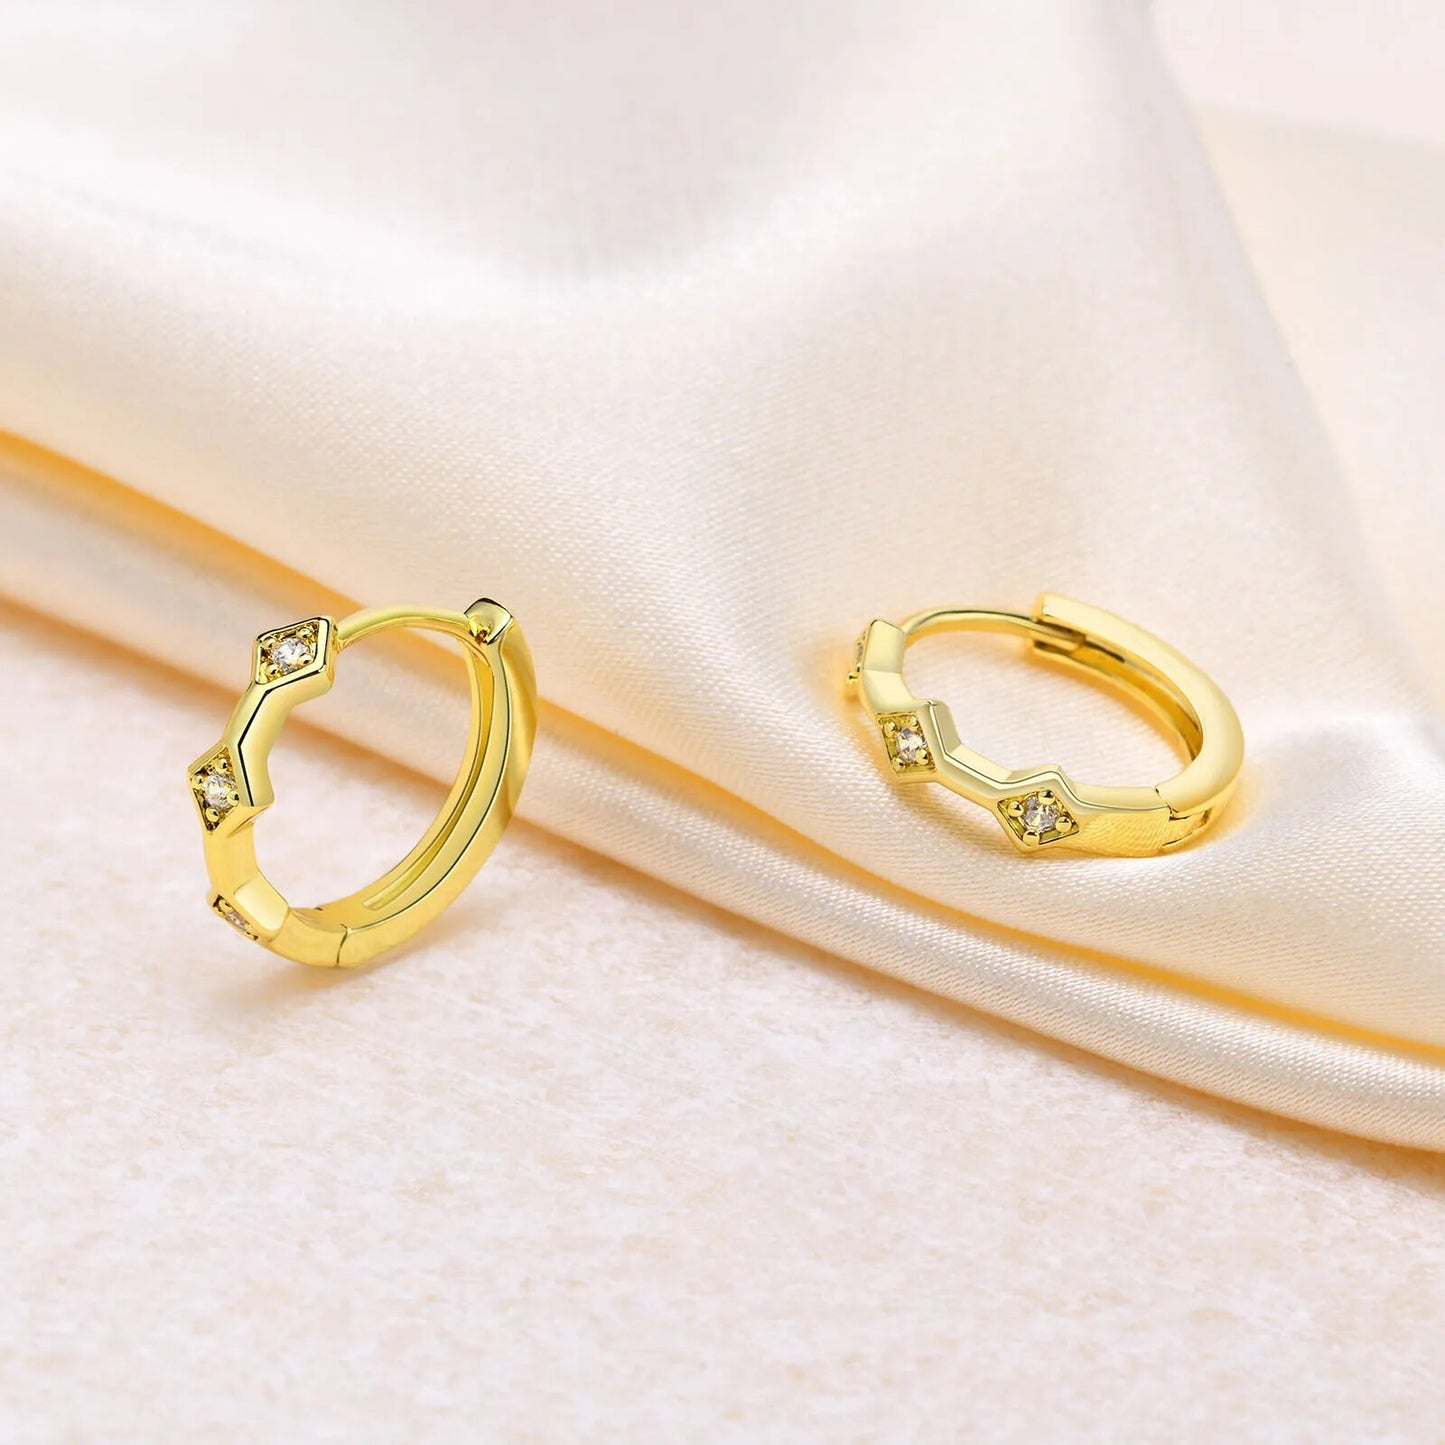 Women's Earrings Aretes para mujeres Women Small Hoop Earrings, Gold Plated Hoops with Sparking Cubic Zirconia Stone, Chic Dainty Girls Huggies